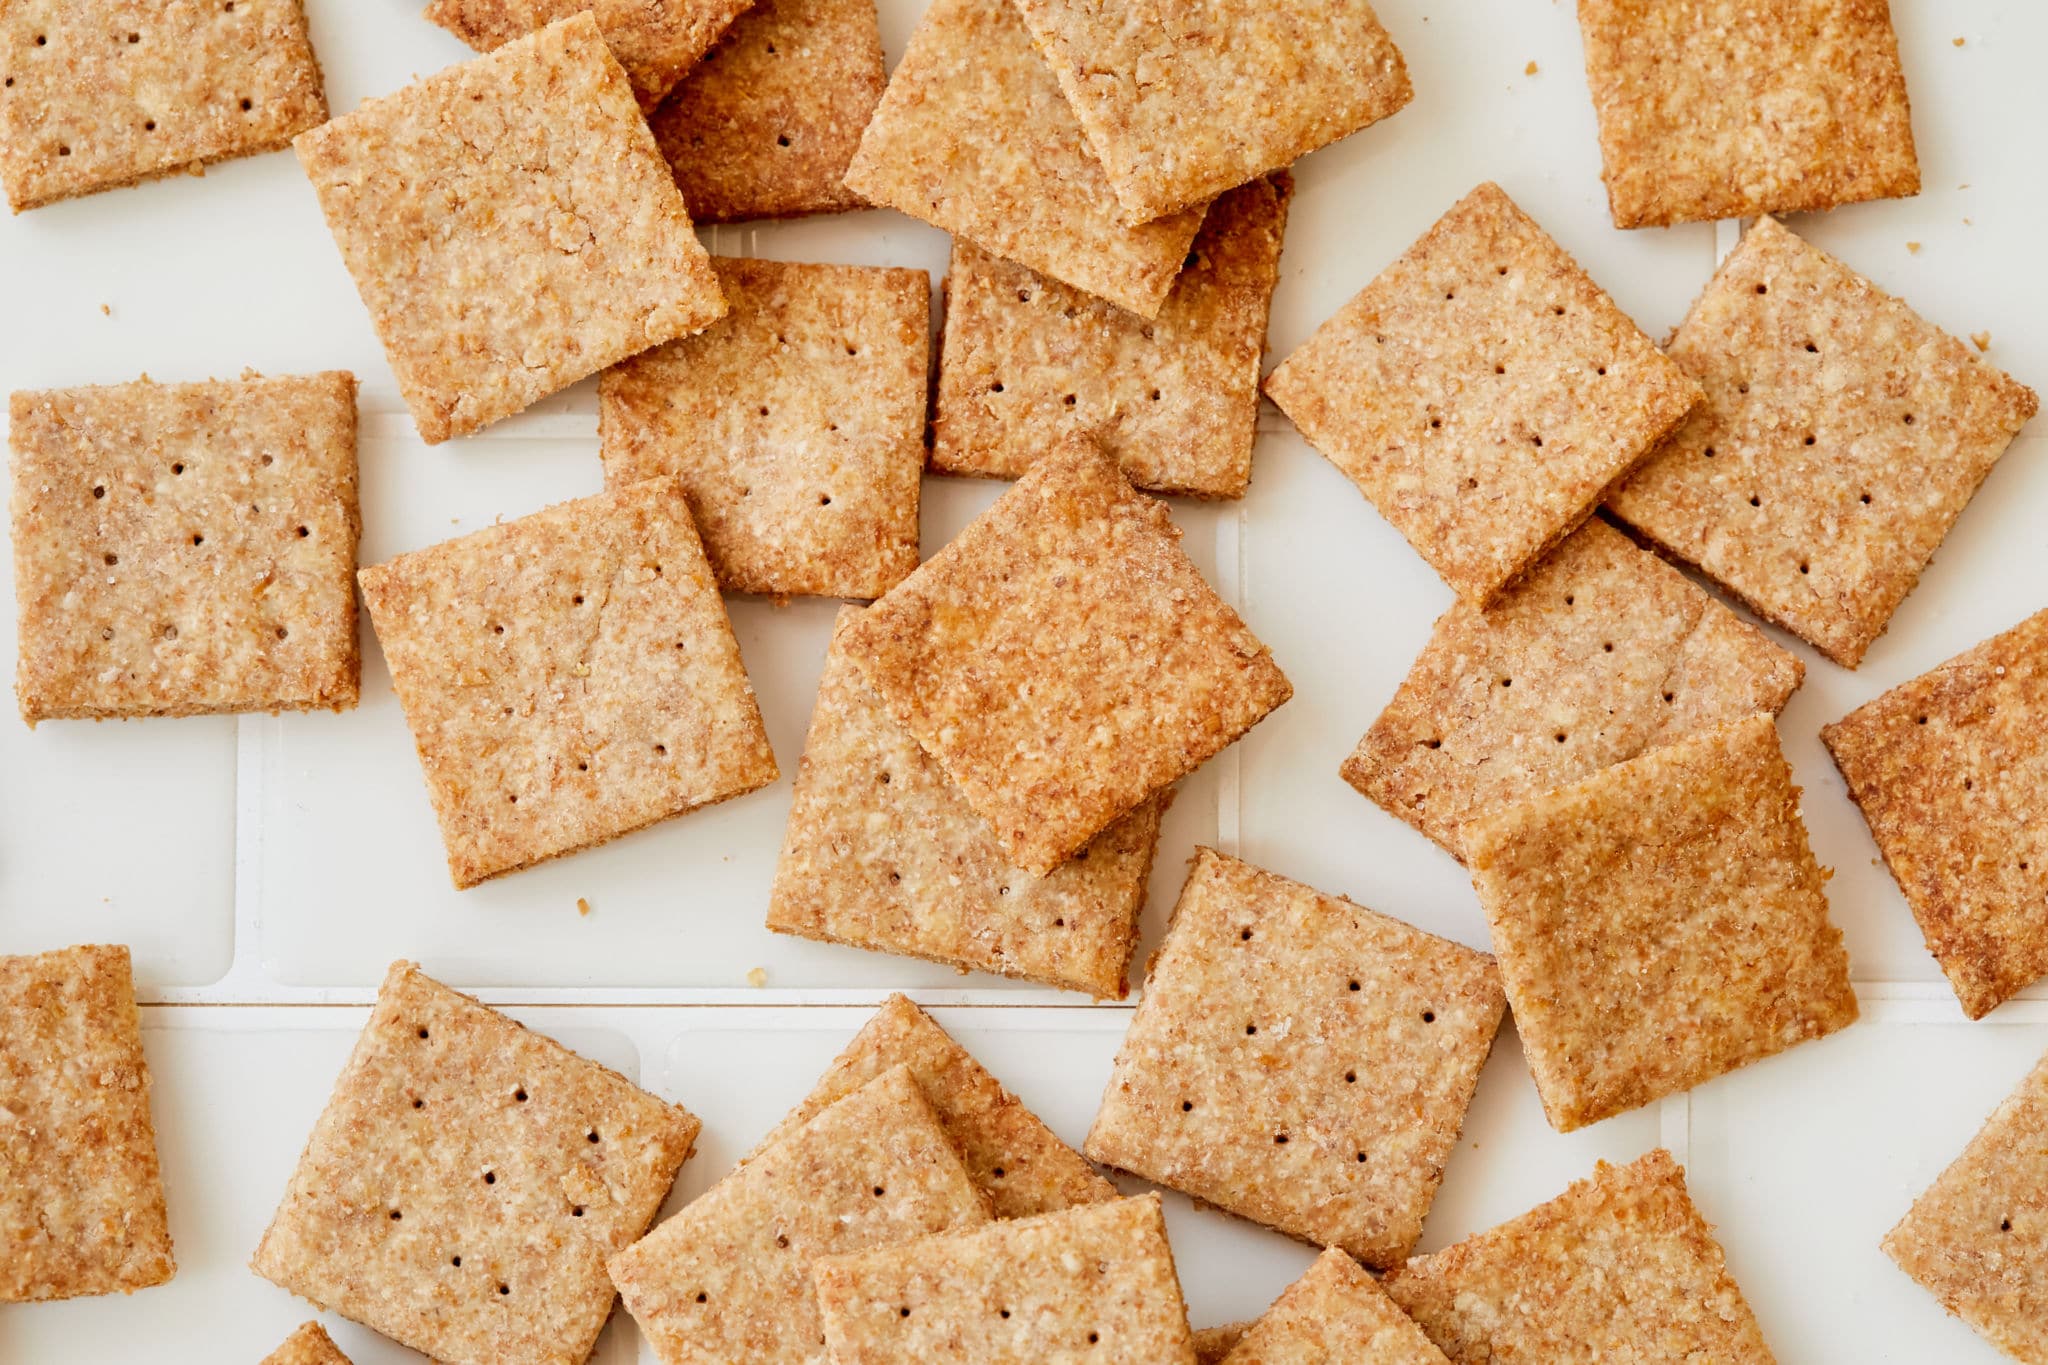 A number of crispy homemade Wheat Thins are spread out on a white background.